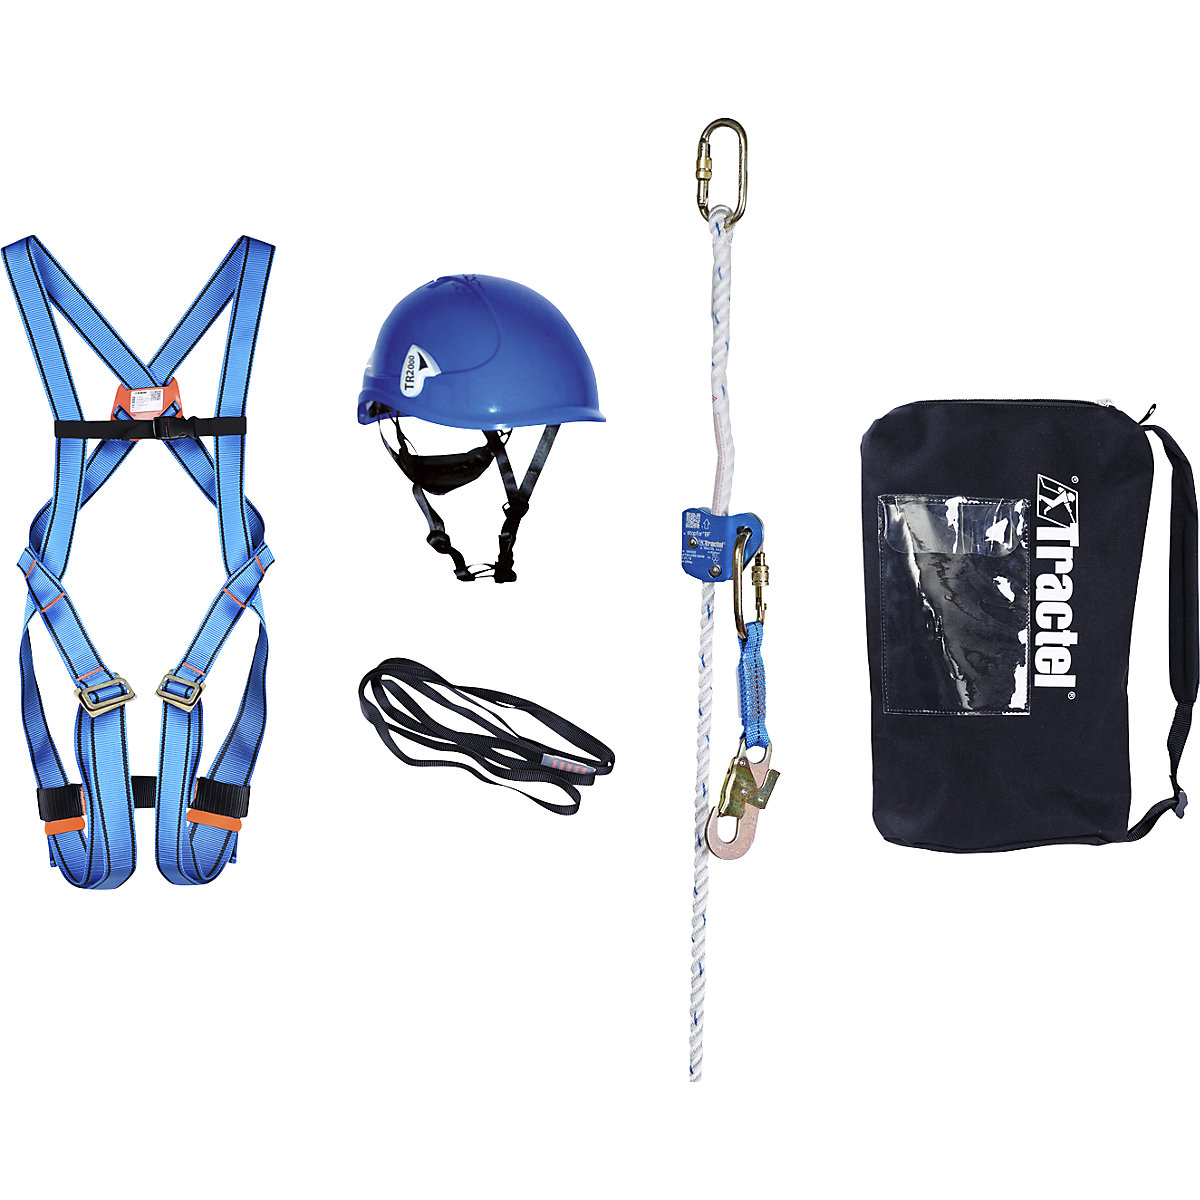 DIY PPE fall protection set: max. load 150 kg